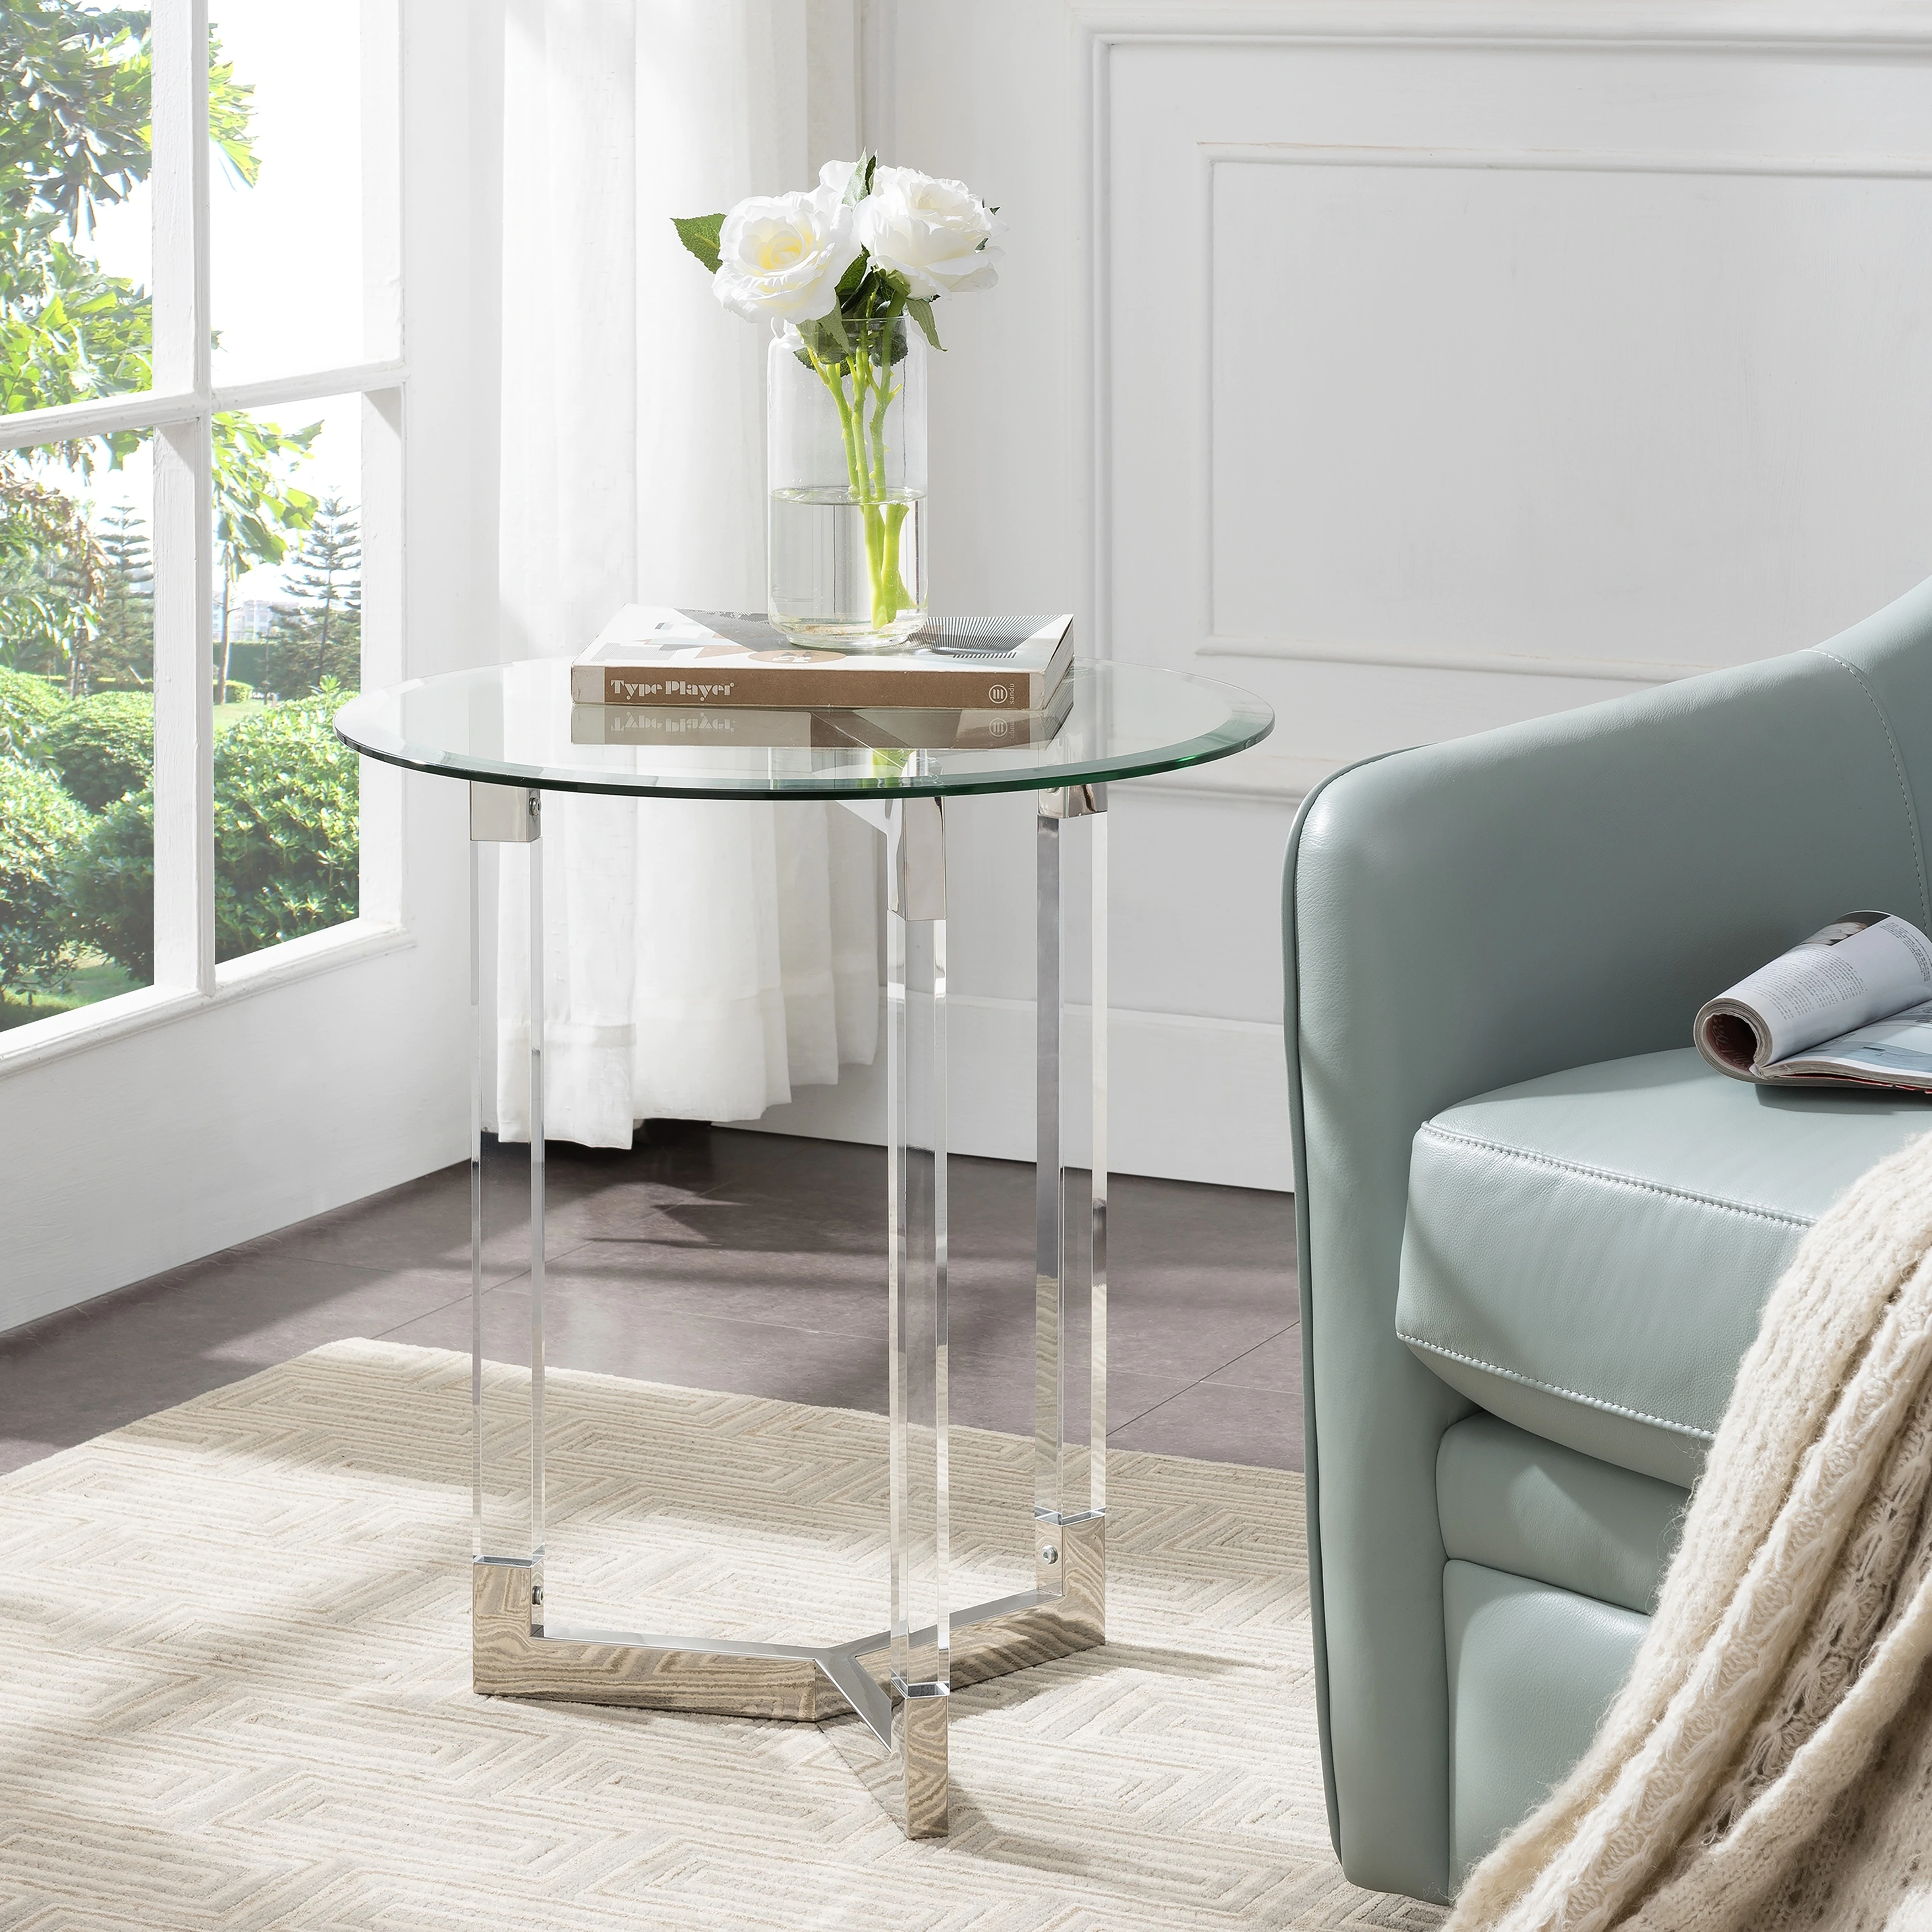 harper blvd dauphine round acrylic accent table with glass top free shipping today pottery barn sconces lucite waterfall coffee bridal shower registry modern legs wrought iron